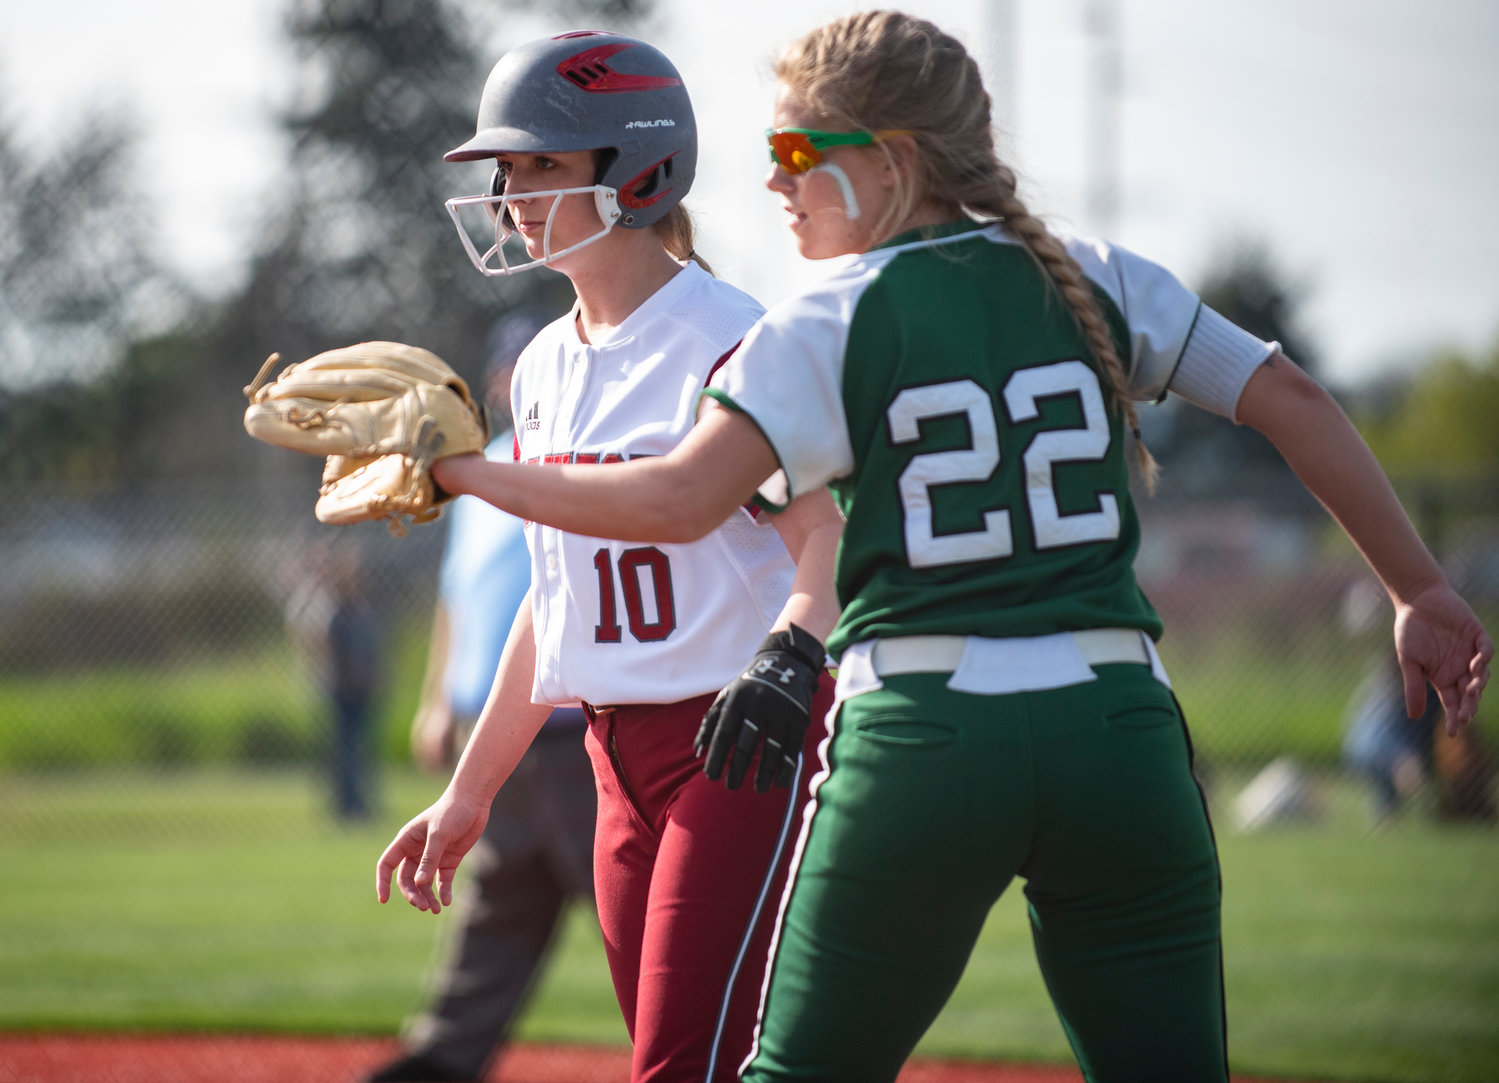 W.F. West's Breanna Crosby watches the Tumwater's catcher while sitting on first base.